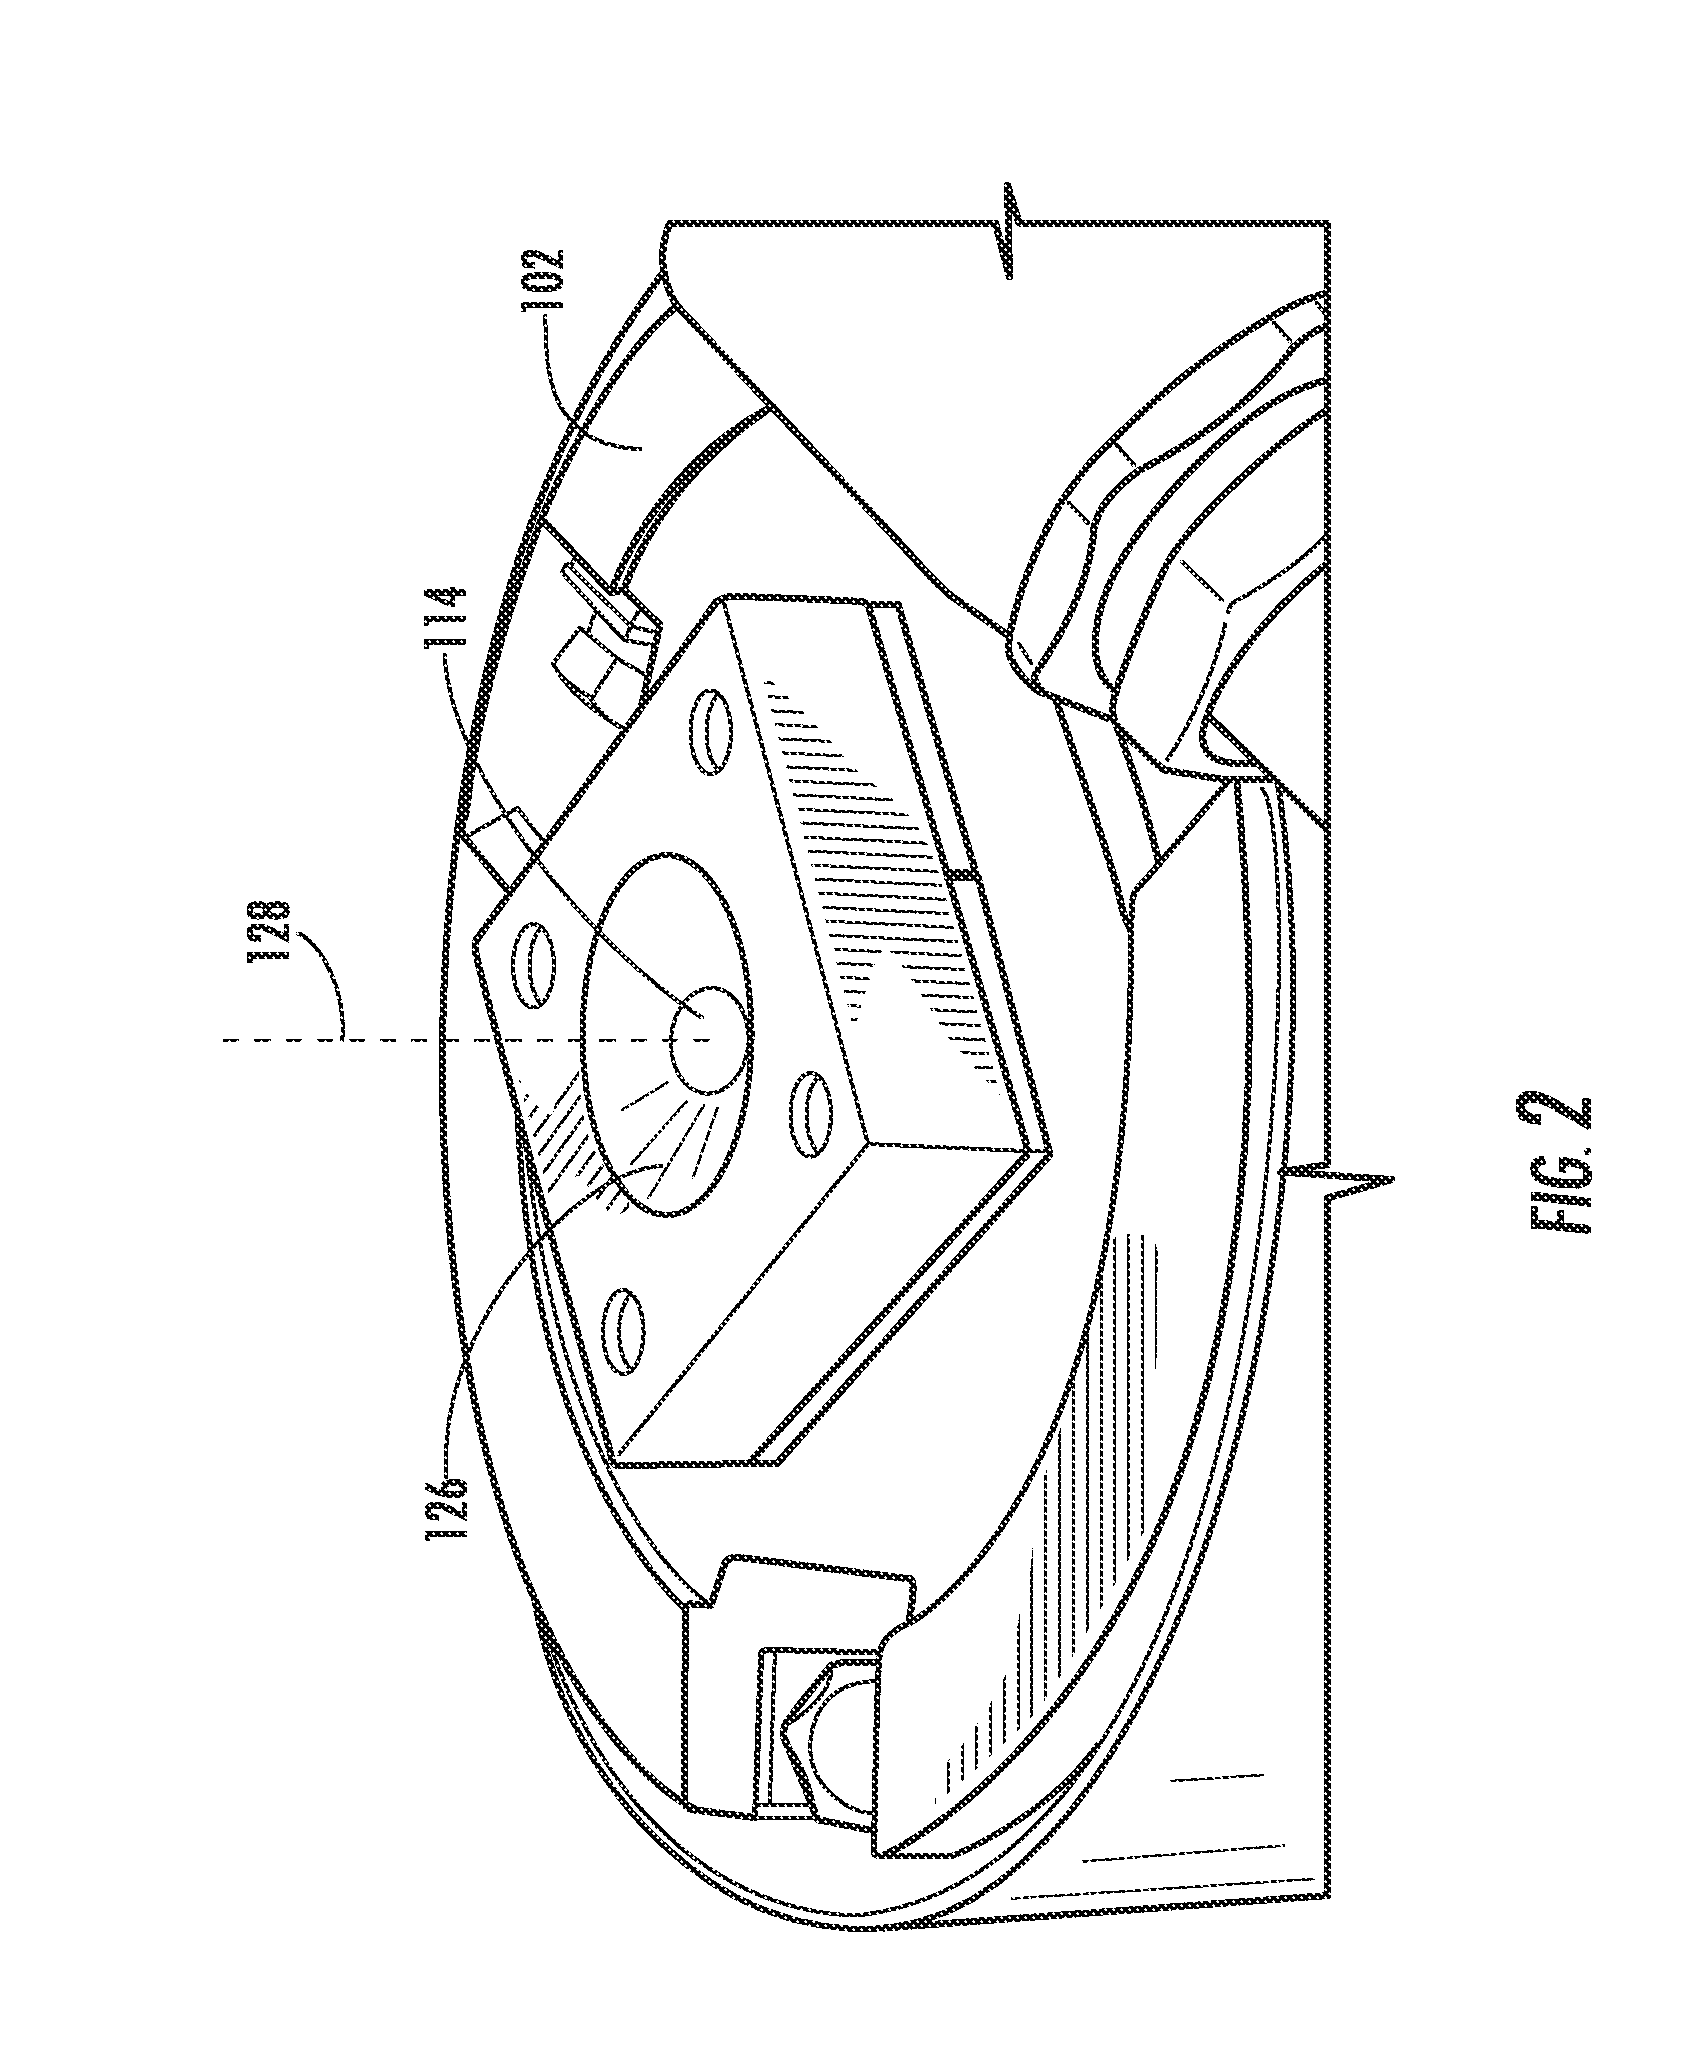 Method and apparatus for non-destructive testing of a seed